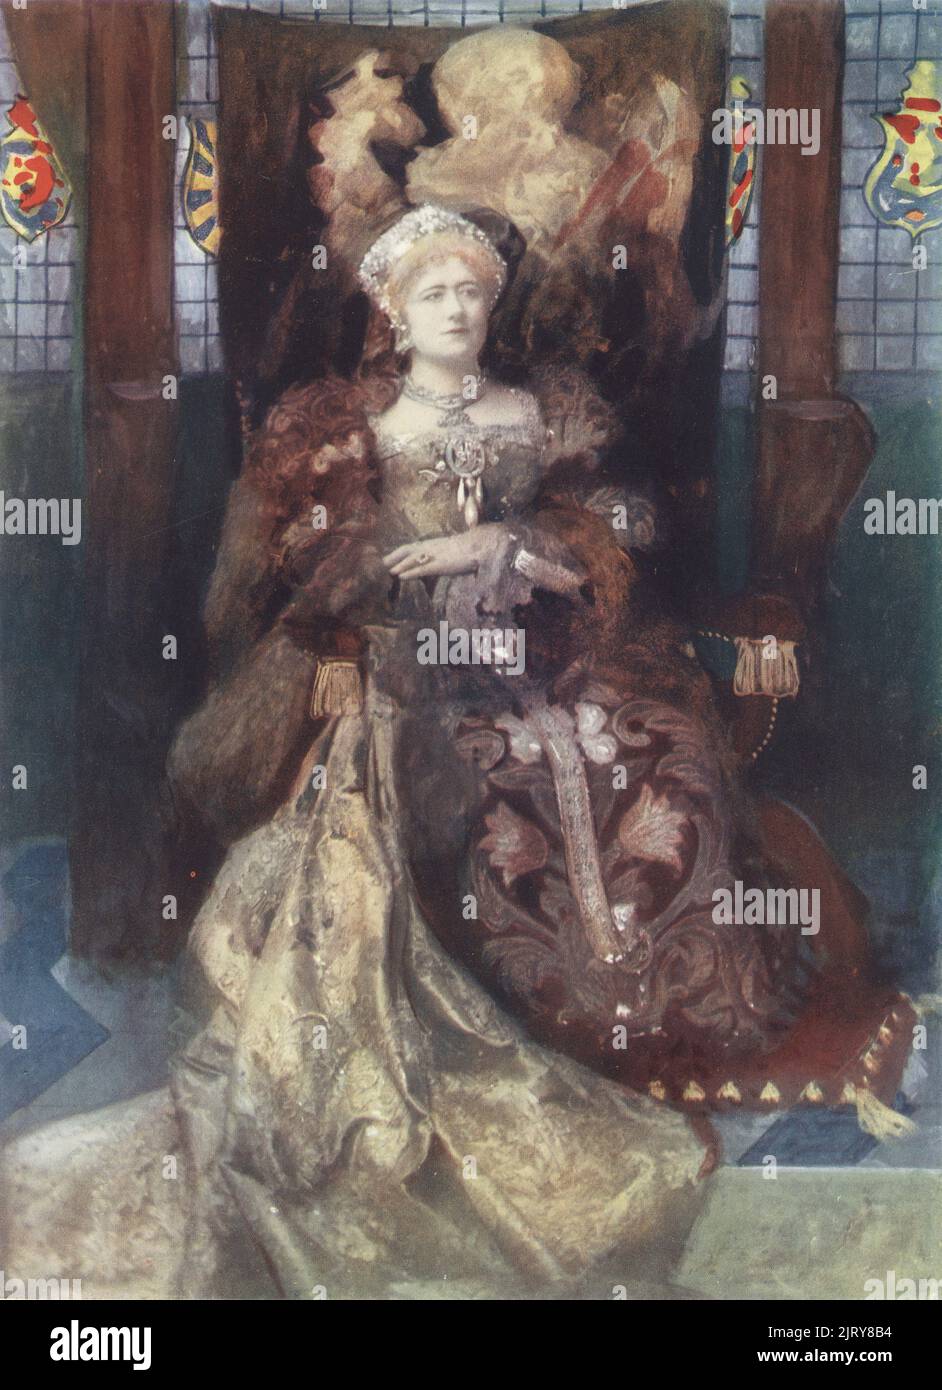 Miss Ellen Terry as Queen Katherine of Aragon in William Shakespeare's Henry VIII, in a costume designed by Sir Henry Irving for the production at the Lyceum, 1892. Dame Alice Ellen Terry, leading English actress of the Victorian and Edwardian eras, 1847-1928. Photograph by Window and Grove (Frederick Richard Window and William Henry Grove). Colour printing of a hand-coloured illustration based on a monochrome photograph from George Newnes’s Players of the Day, London, 1905. Stock Photo